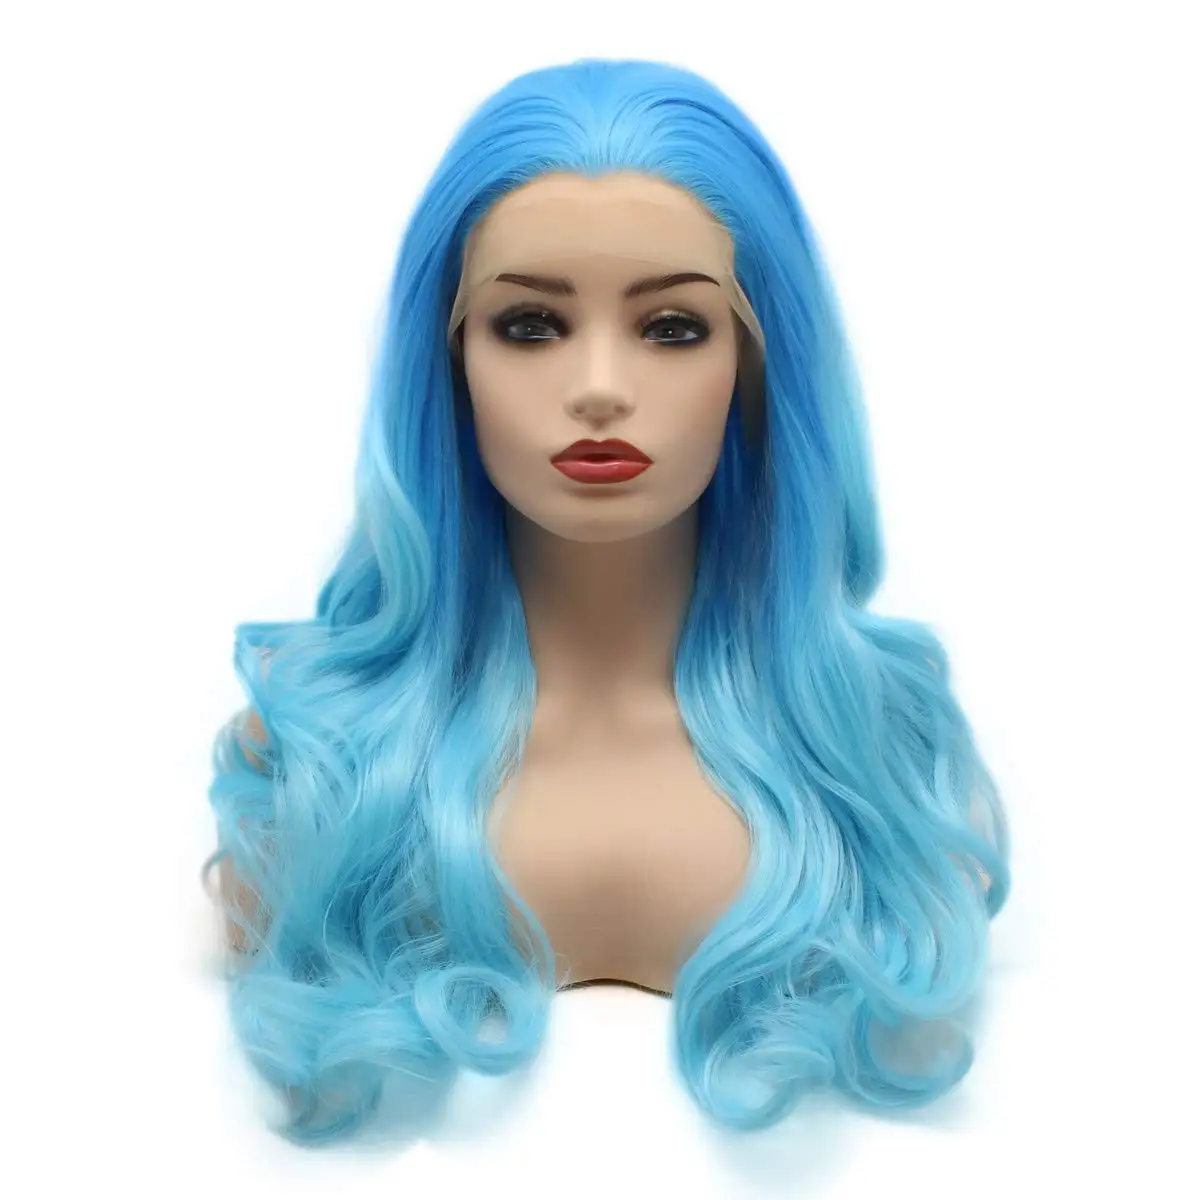 

Jeelion Hair Wavy Long 24inch Two Tone Blue Ombre Half Hand Tied Heat Resistant Synthetic Lace Front Wig